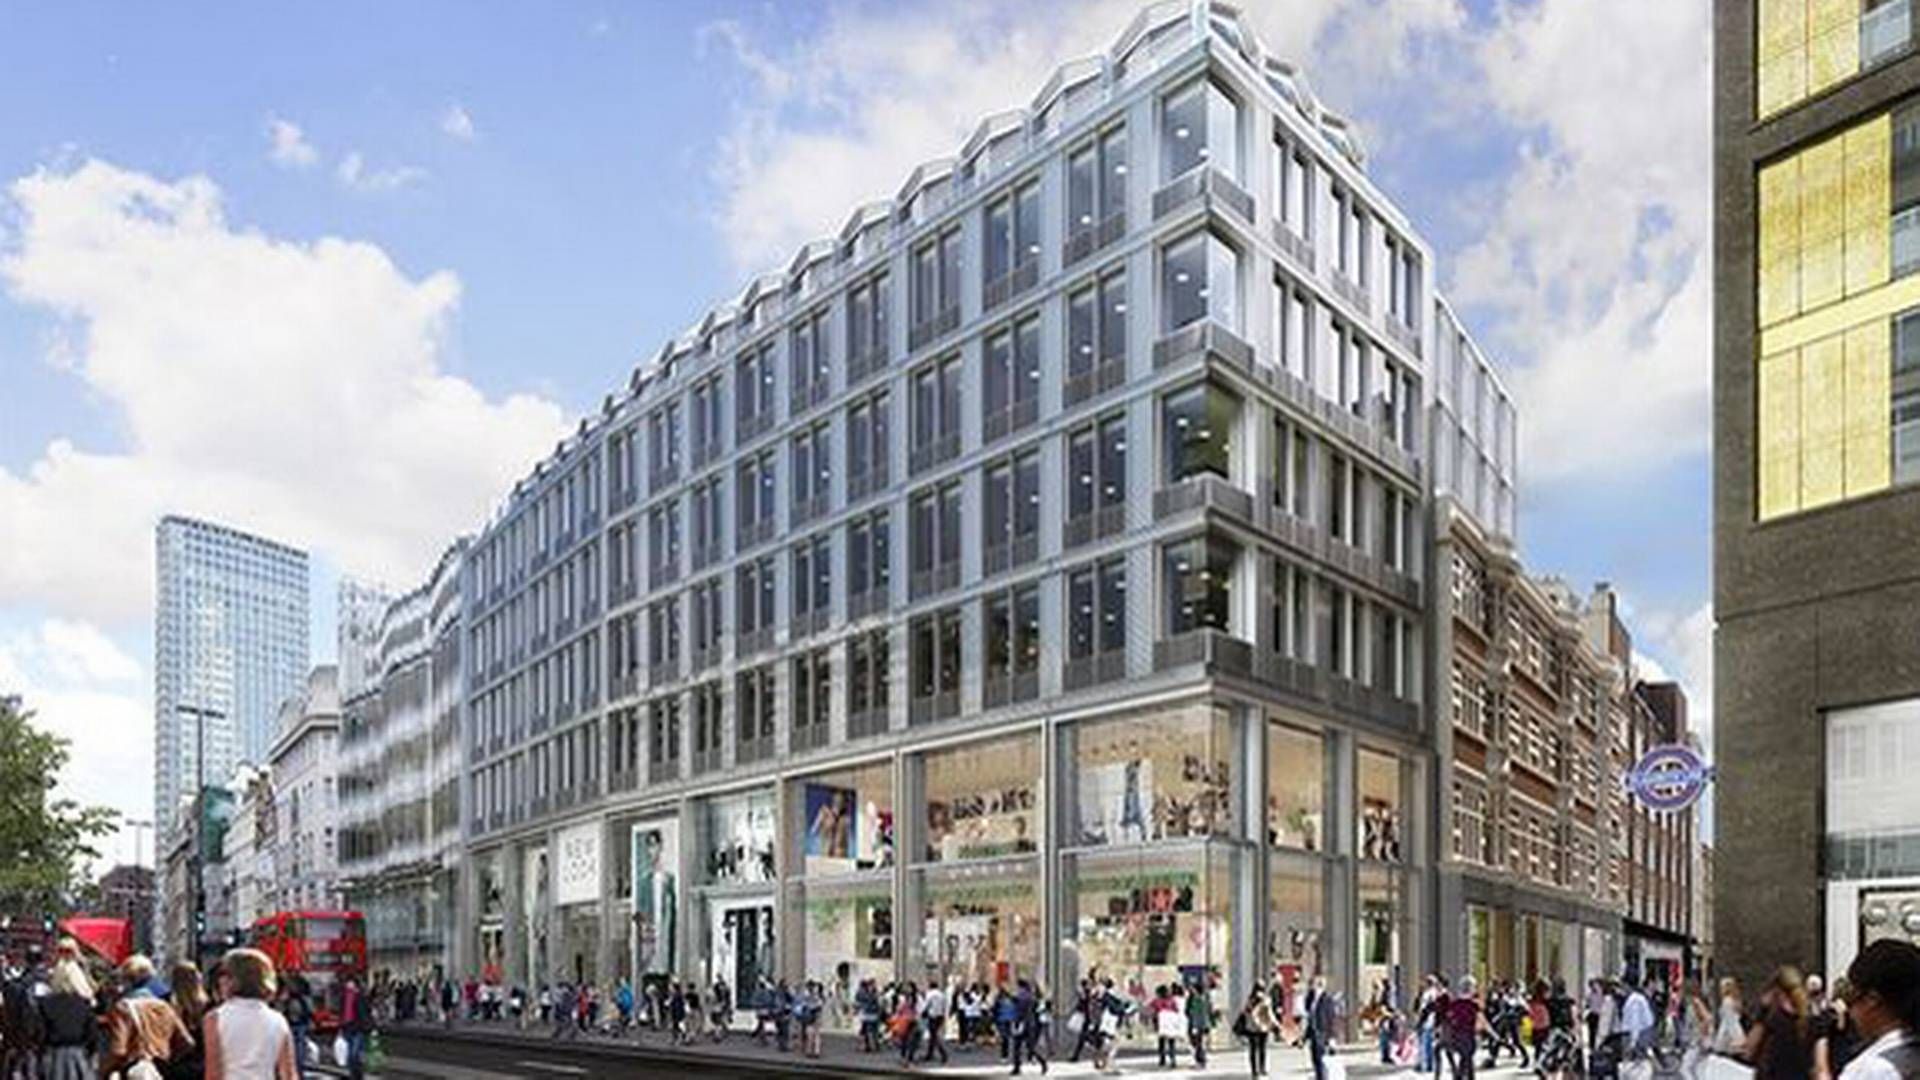 73-89, Oxford Street in London is one of the real estate investments made by Norway's oil fund. | Photo: PR